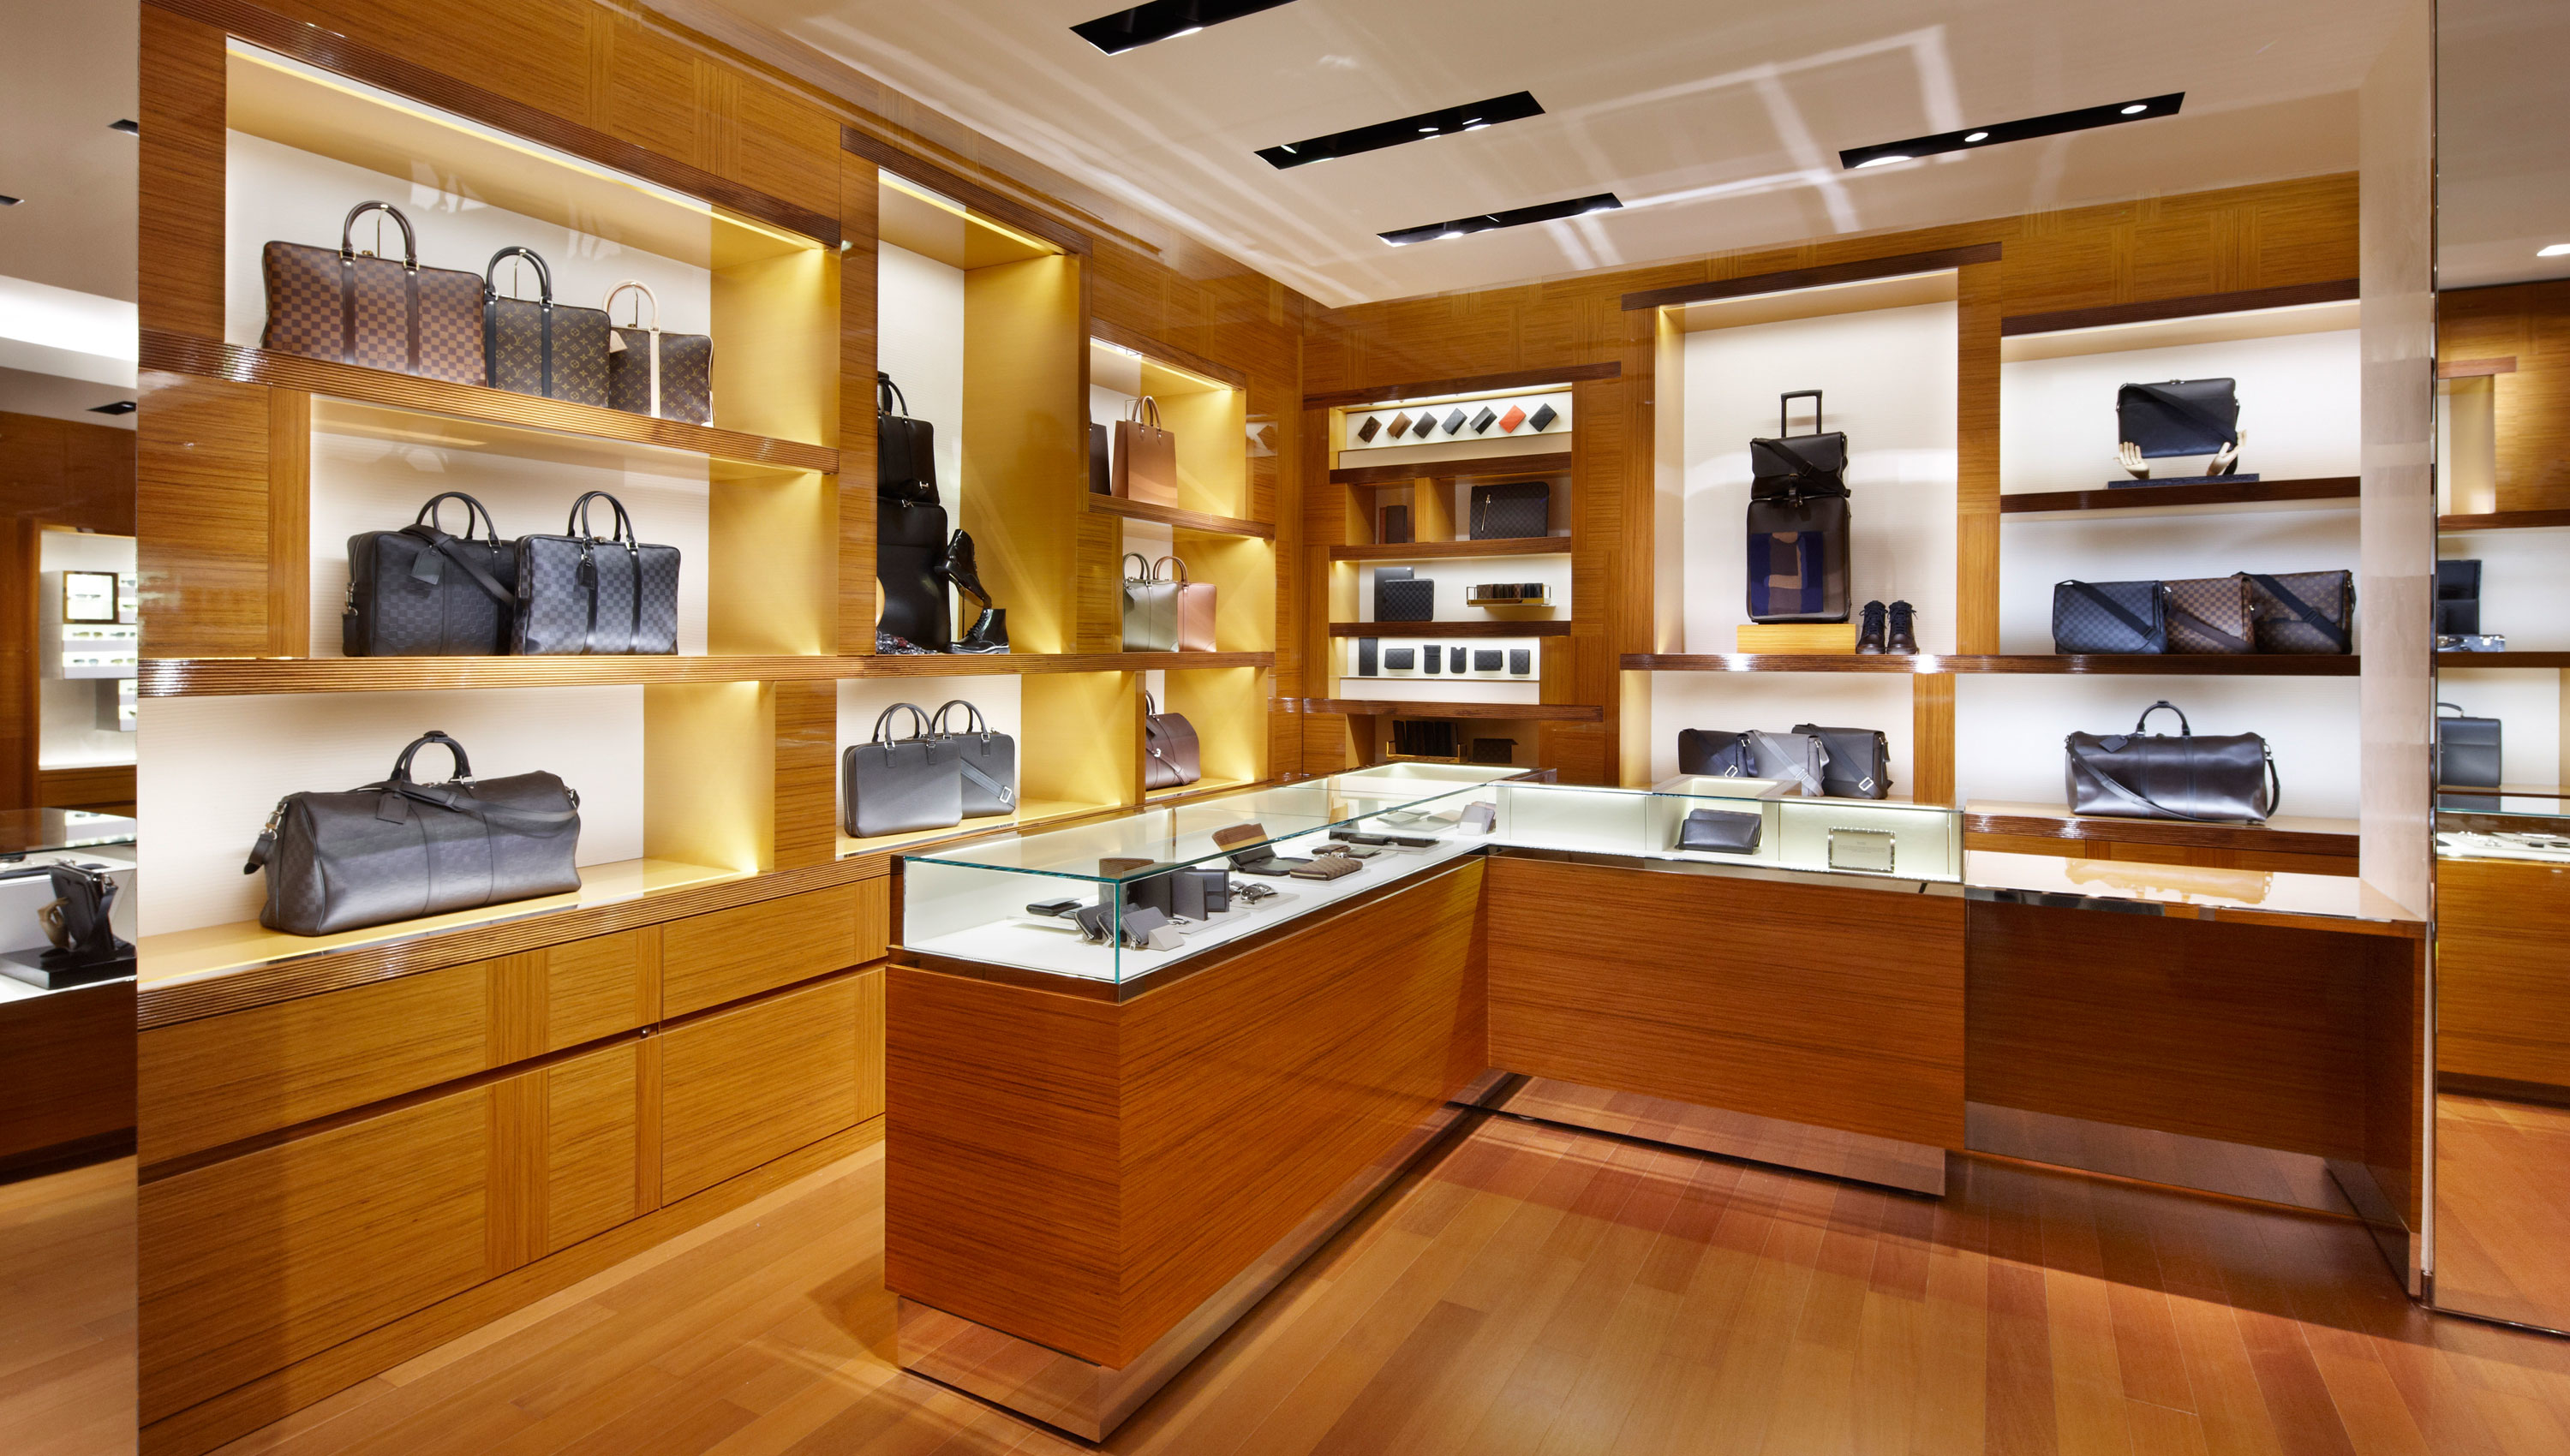 Louis Vuitton New York Bloomingdale's store, United States